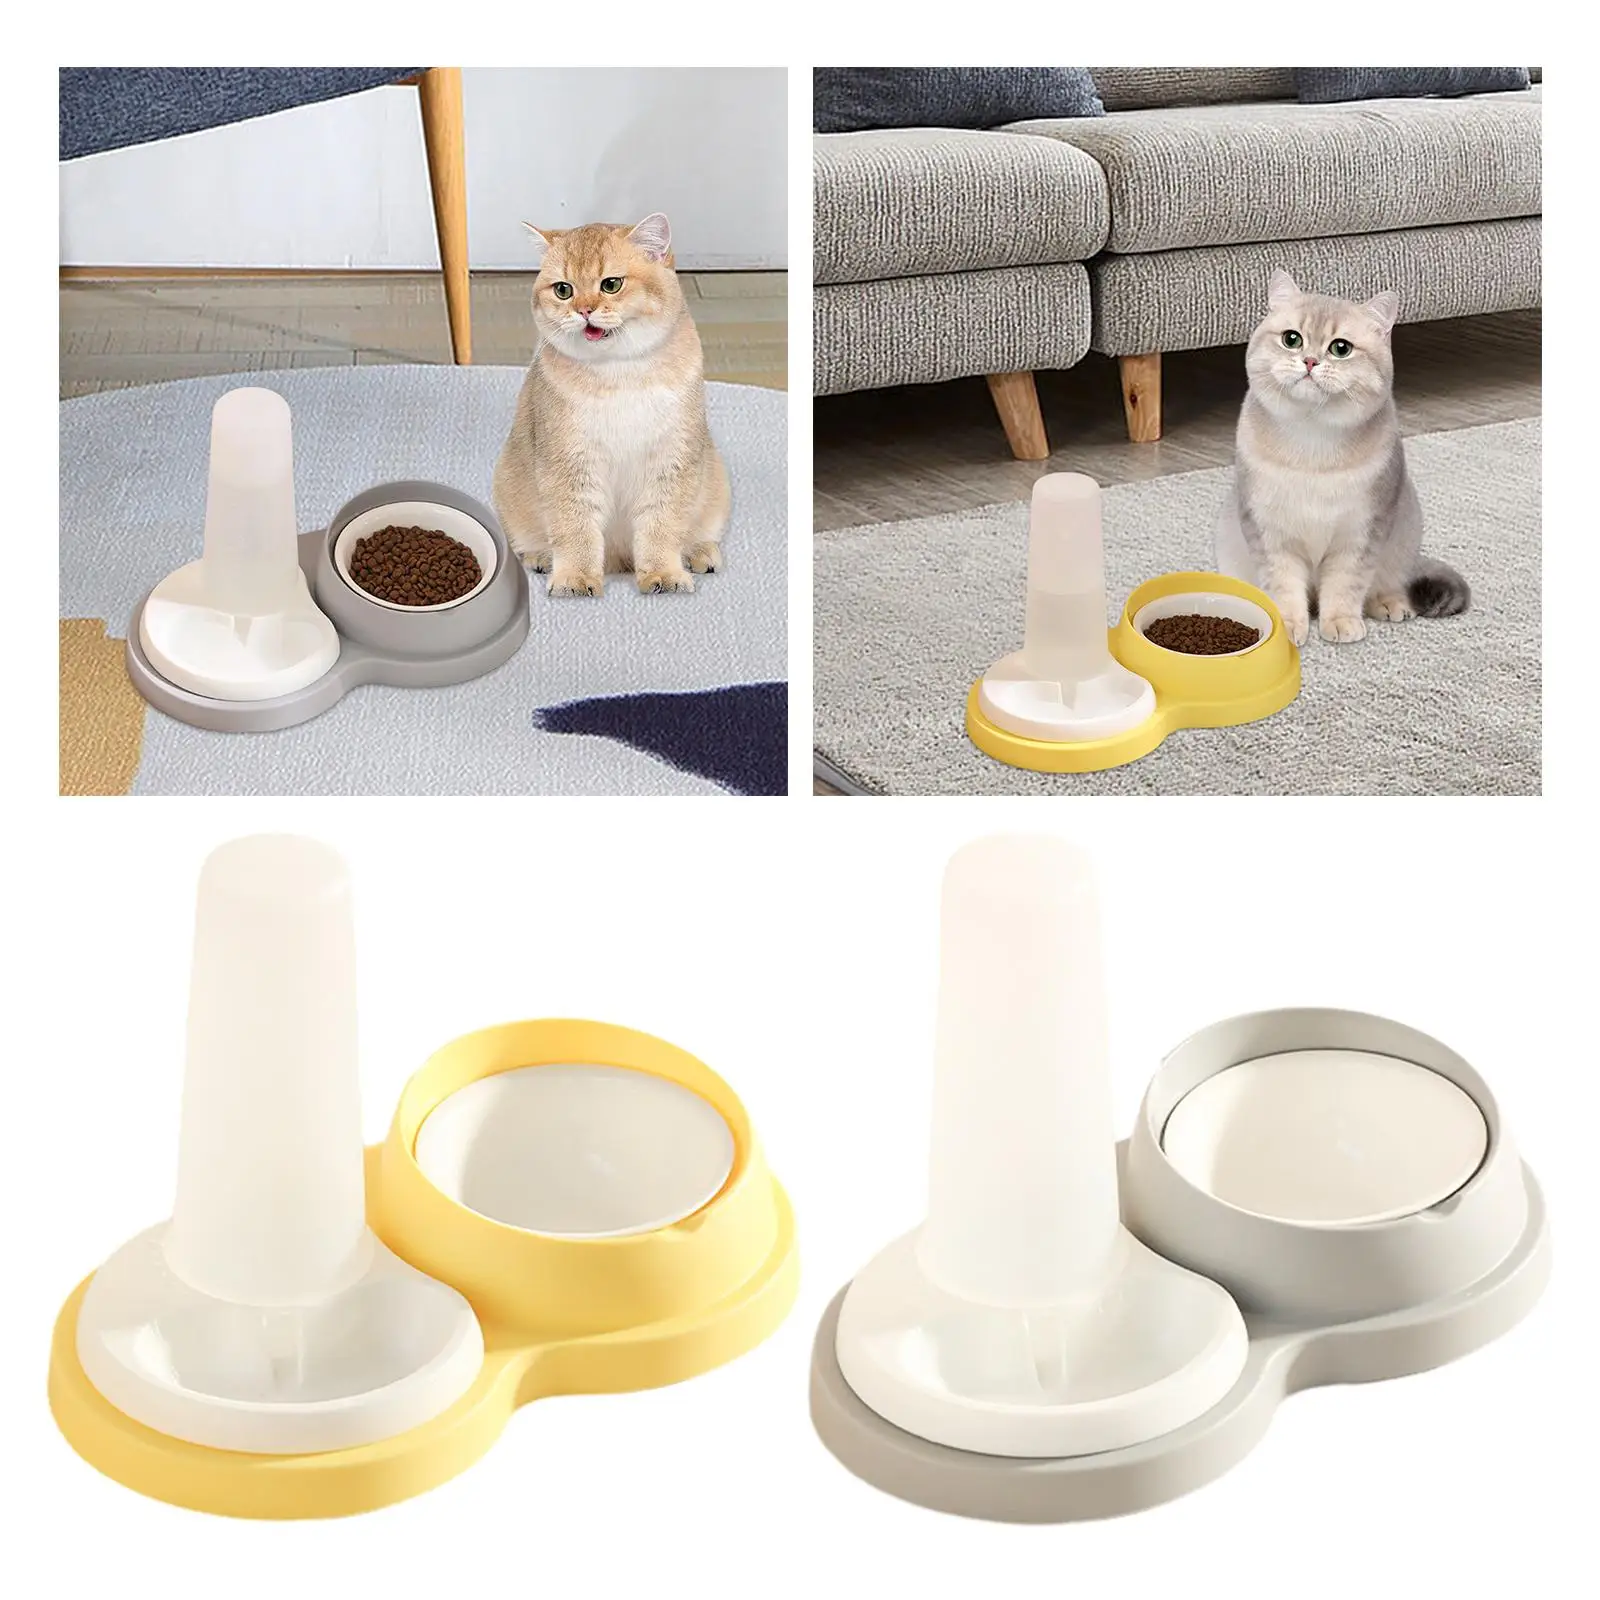 2 in 1 Cat Bowl Set with Automatic Waterer Bottle Raised Pet Feeding Bowls for Kitty Kitten Feeding Drinking Pets Accessories